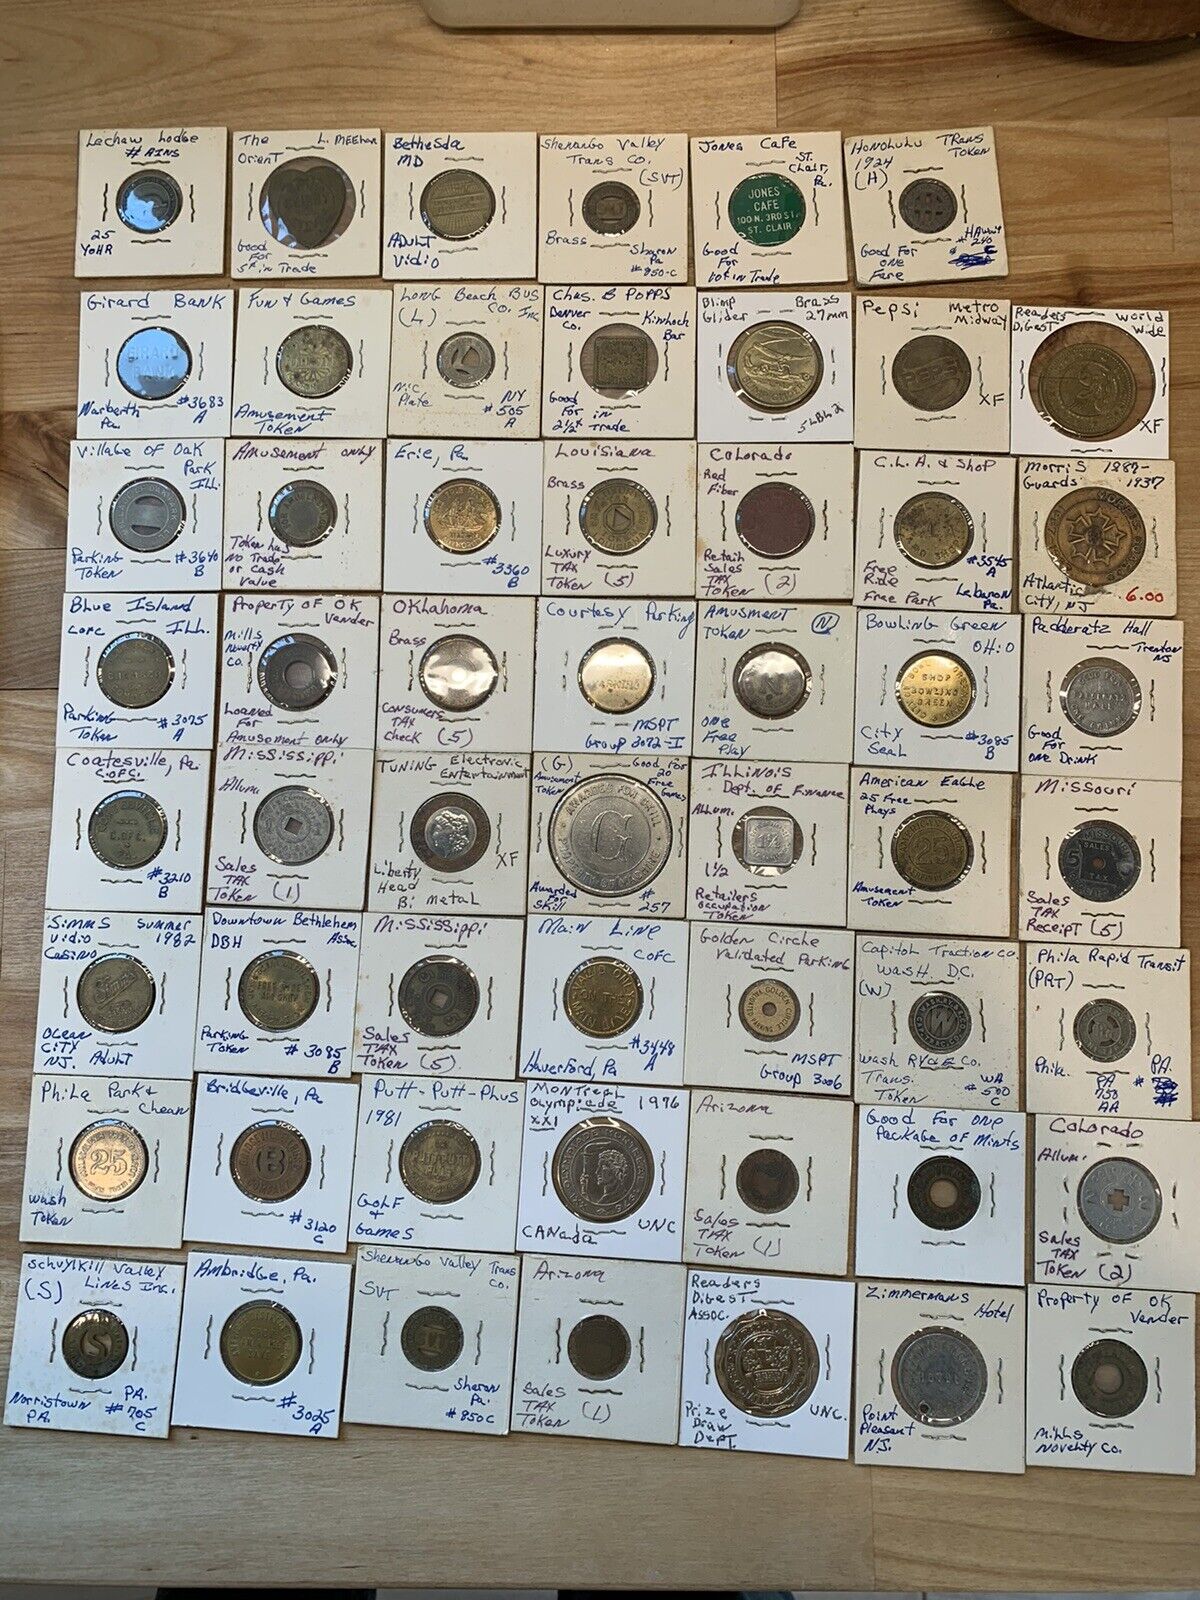 Lot Of Vintage Tokens And Coins From Sales Tax Coins To Adult Video Tokens